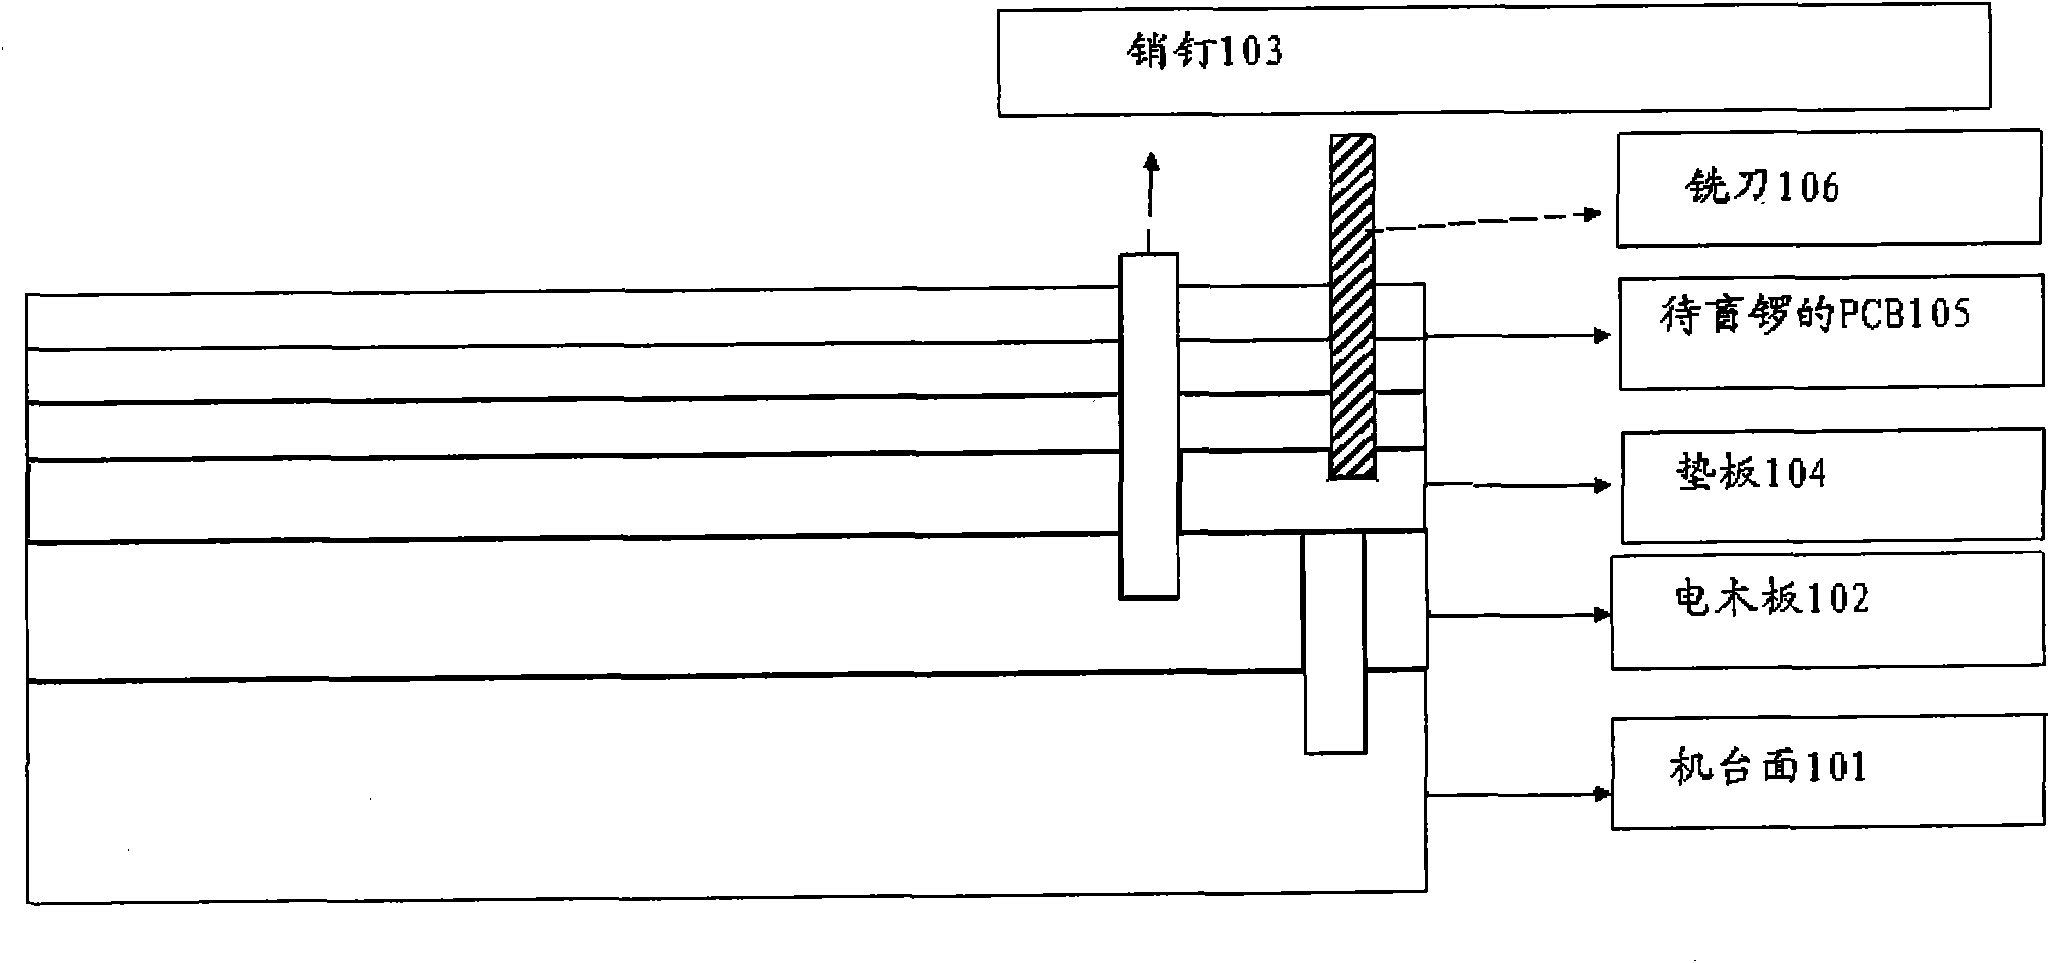 Method and system for forming blind gongs on printed circuit board (PCB) and circuit board